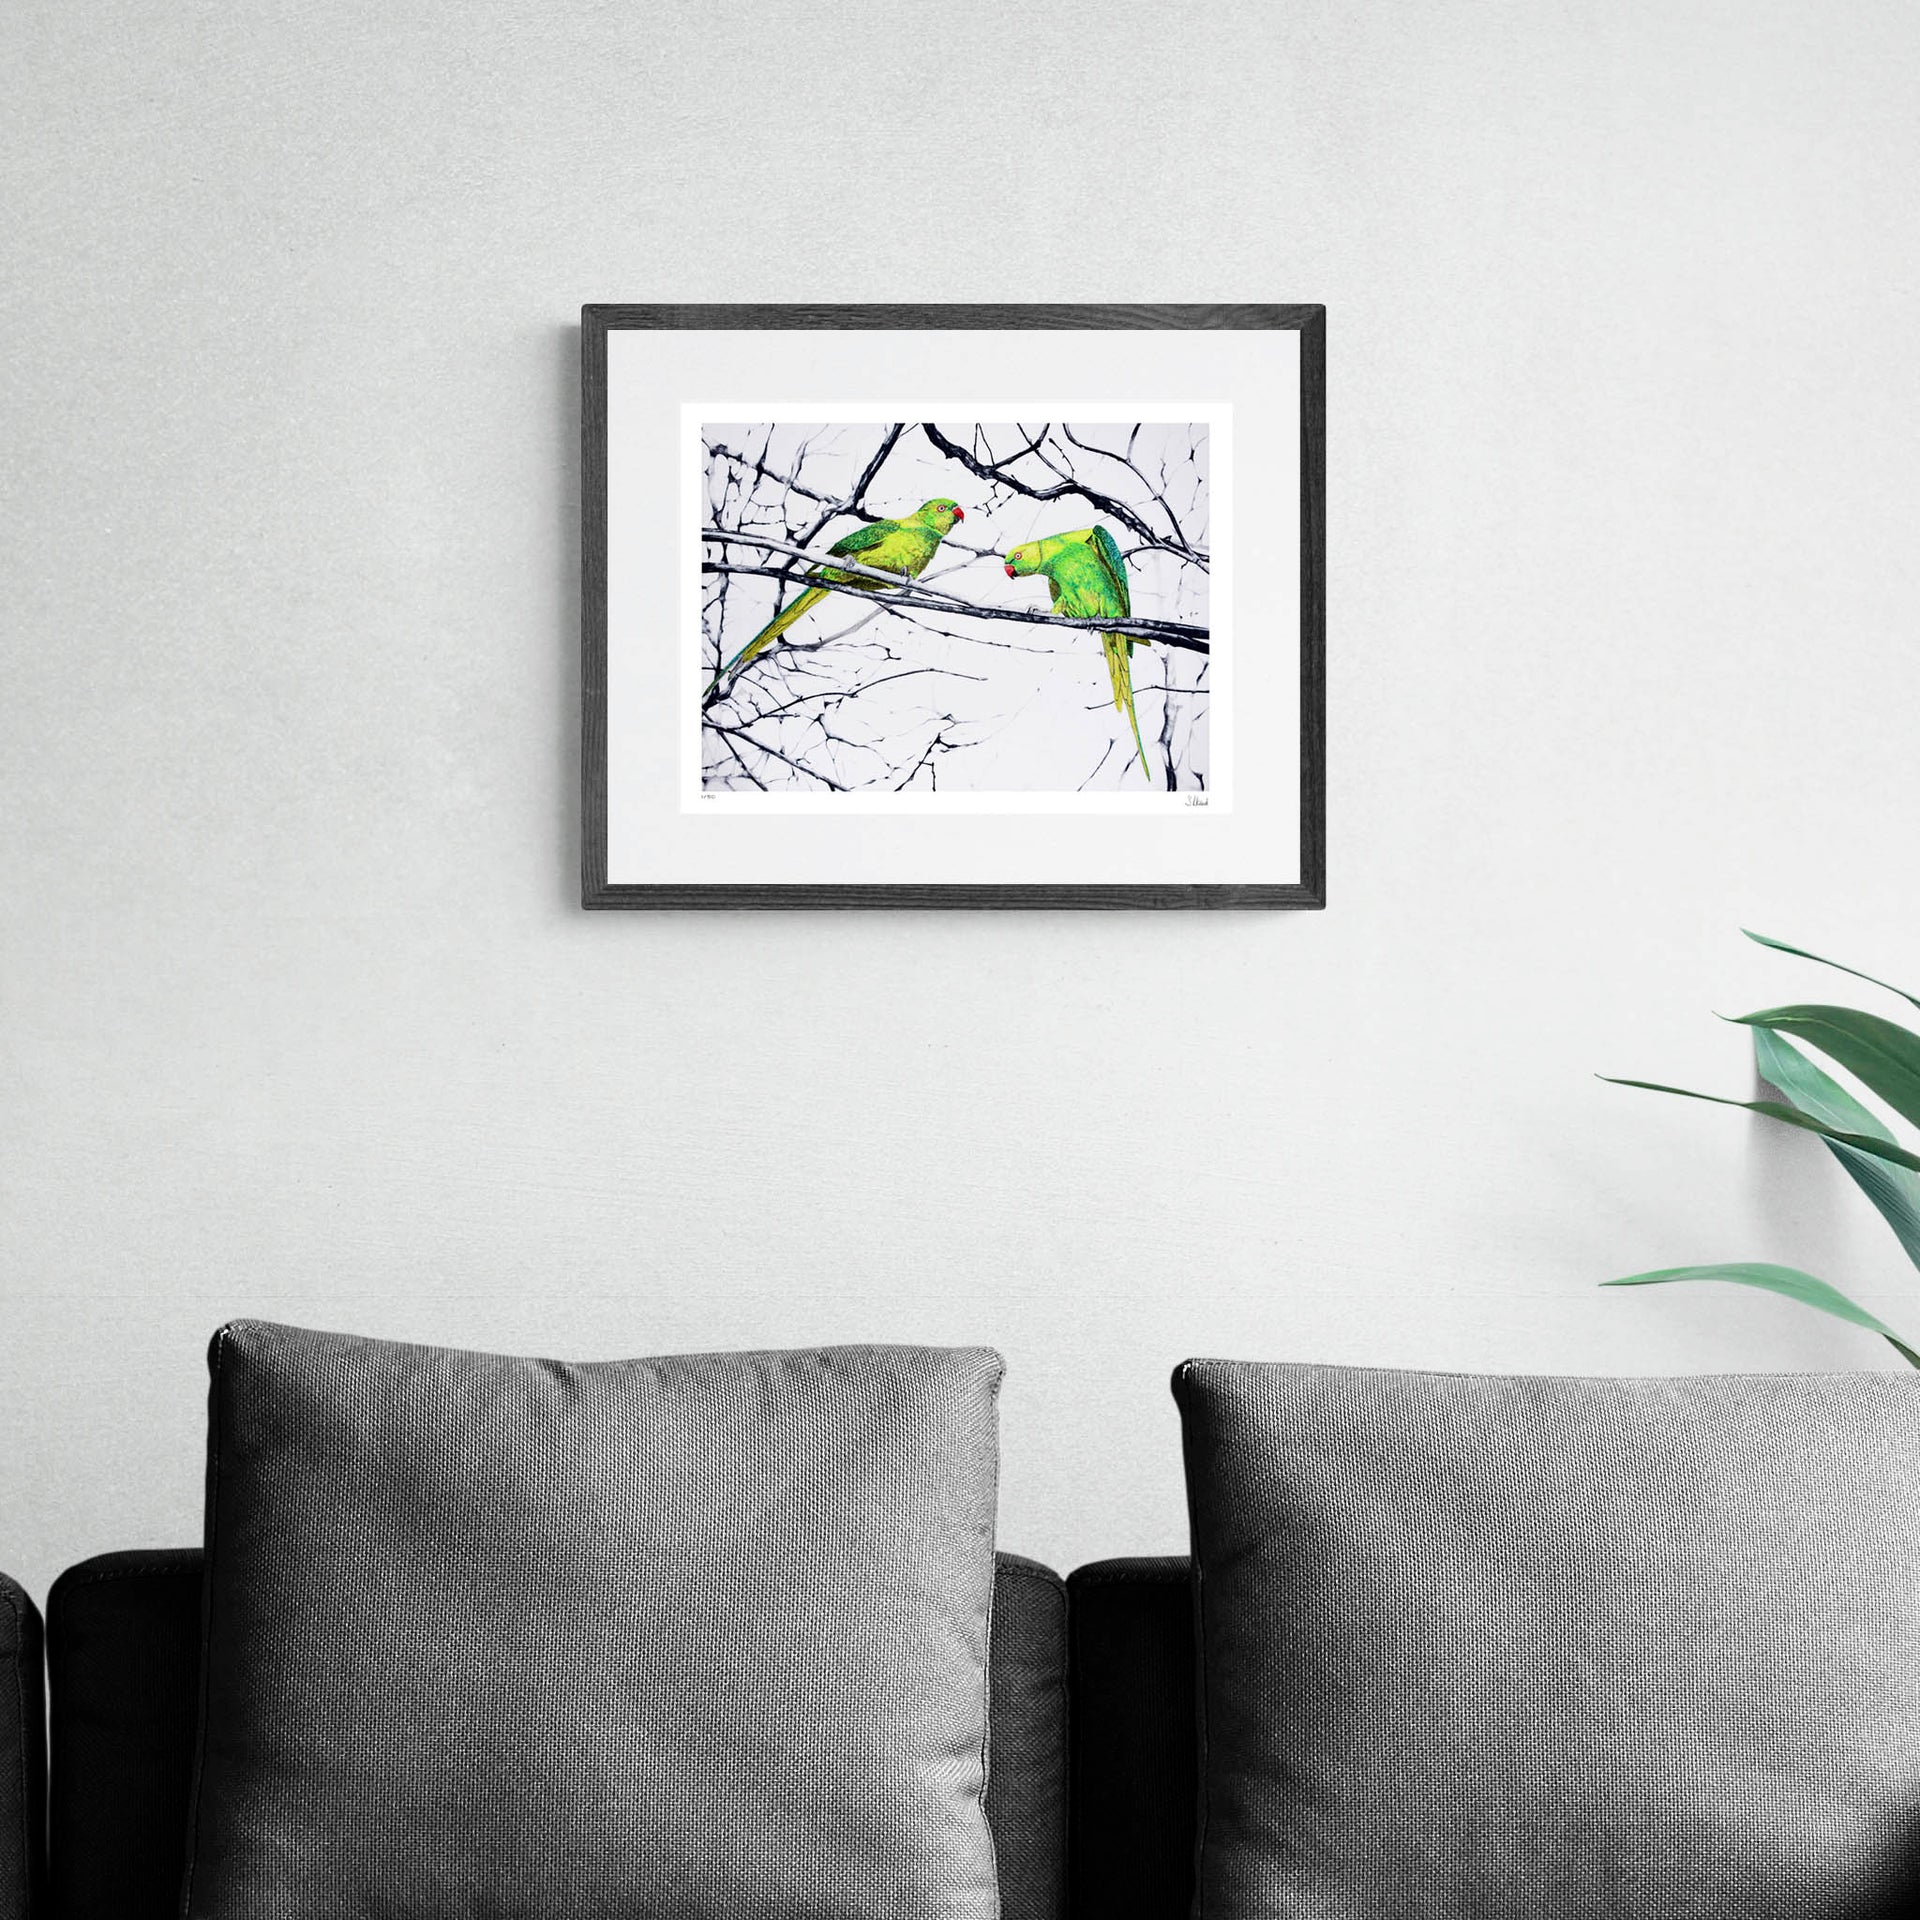 Hand embroidered hyde park parakeets limited edition print in black frame on the wall